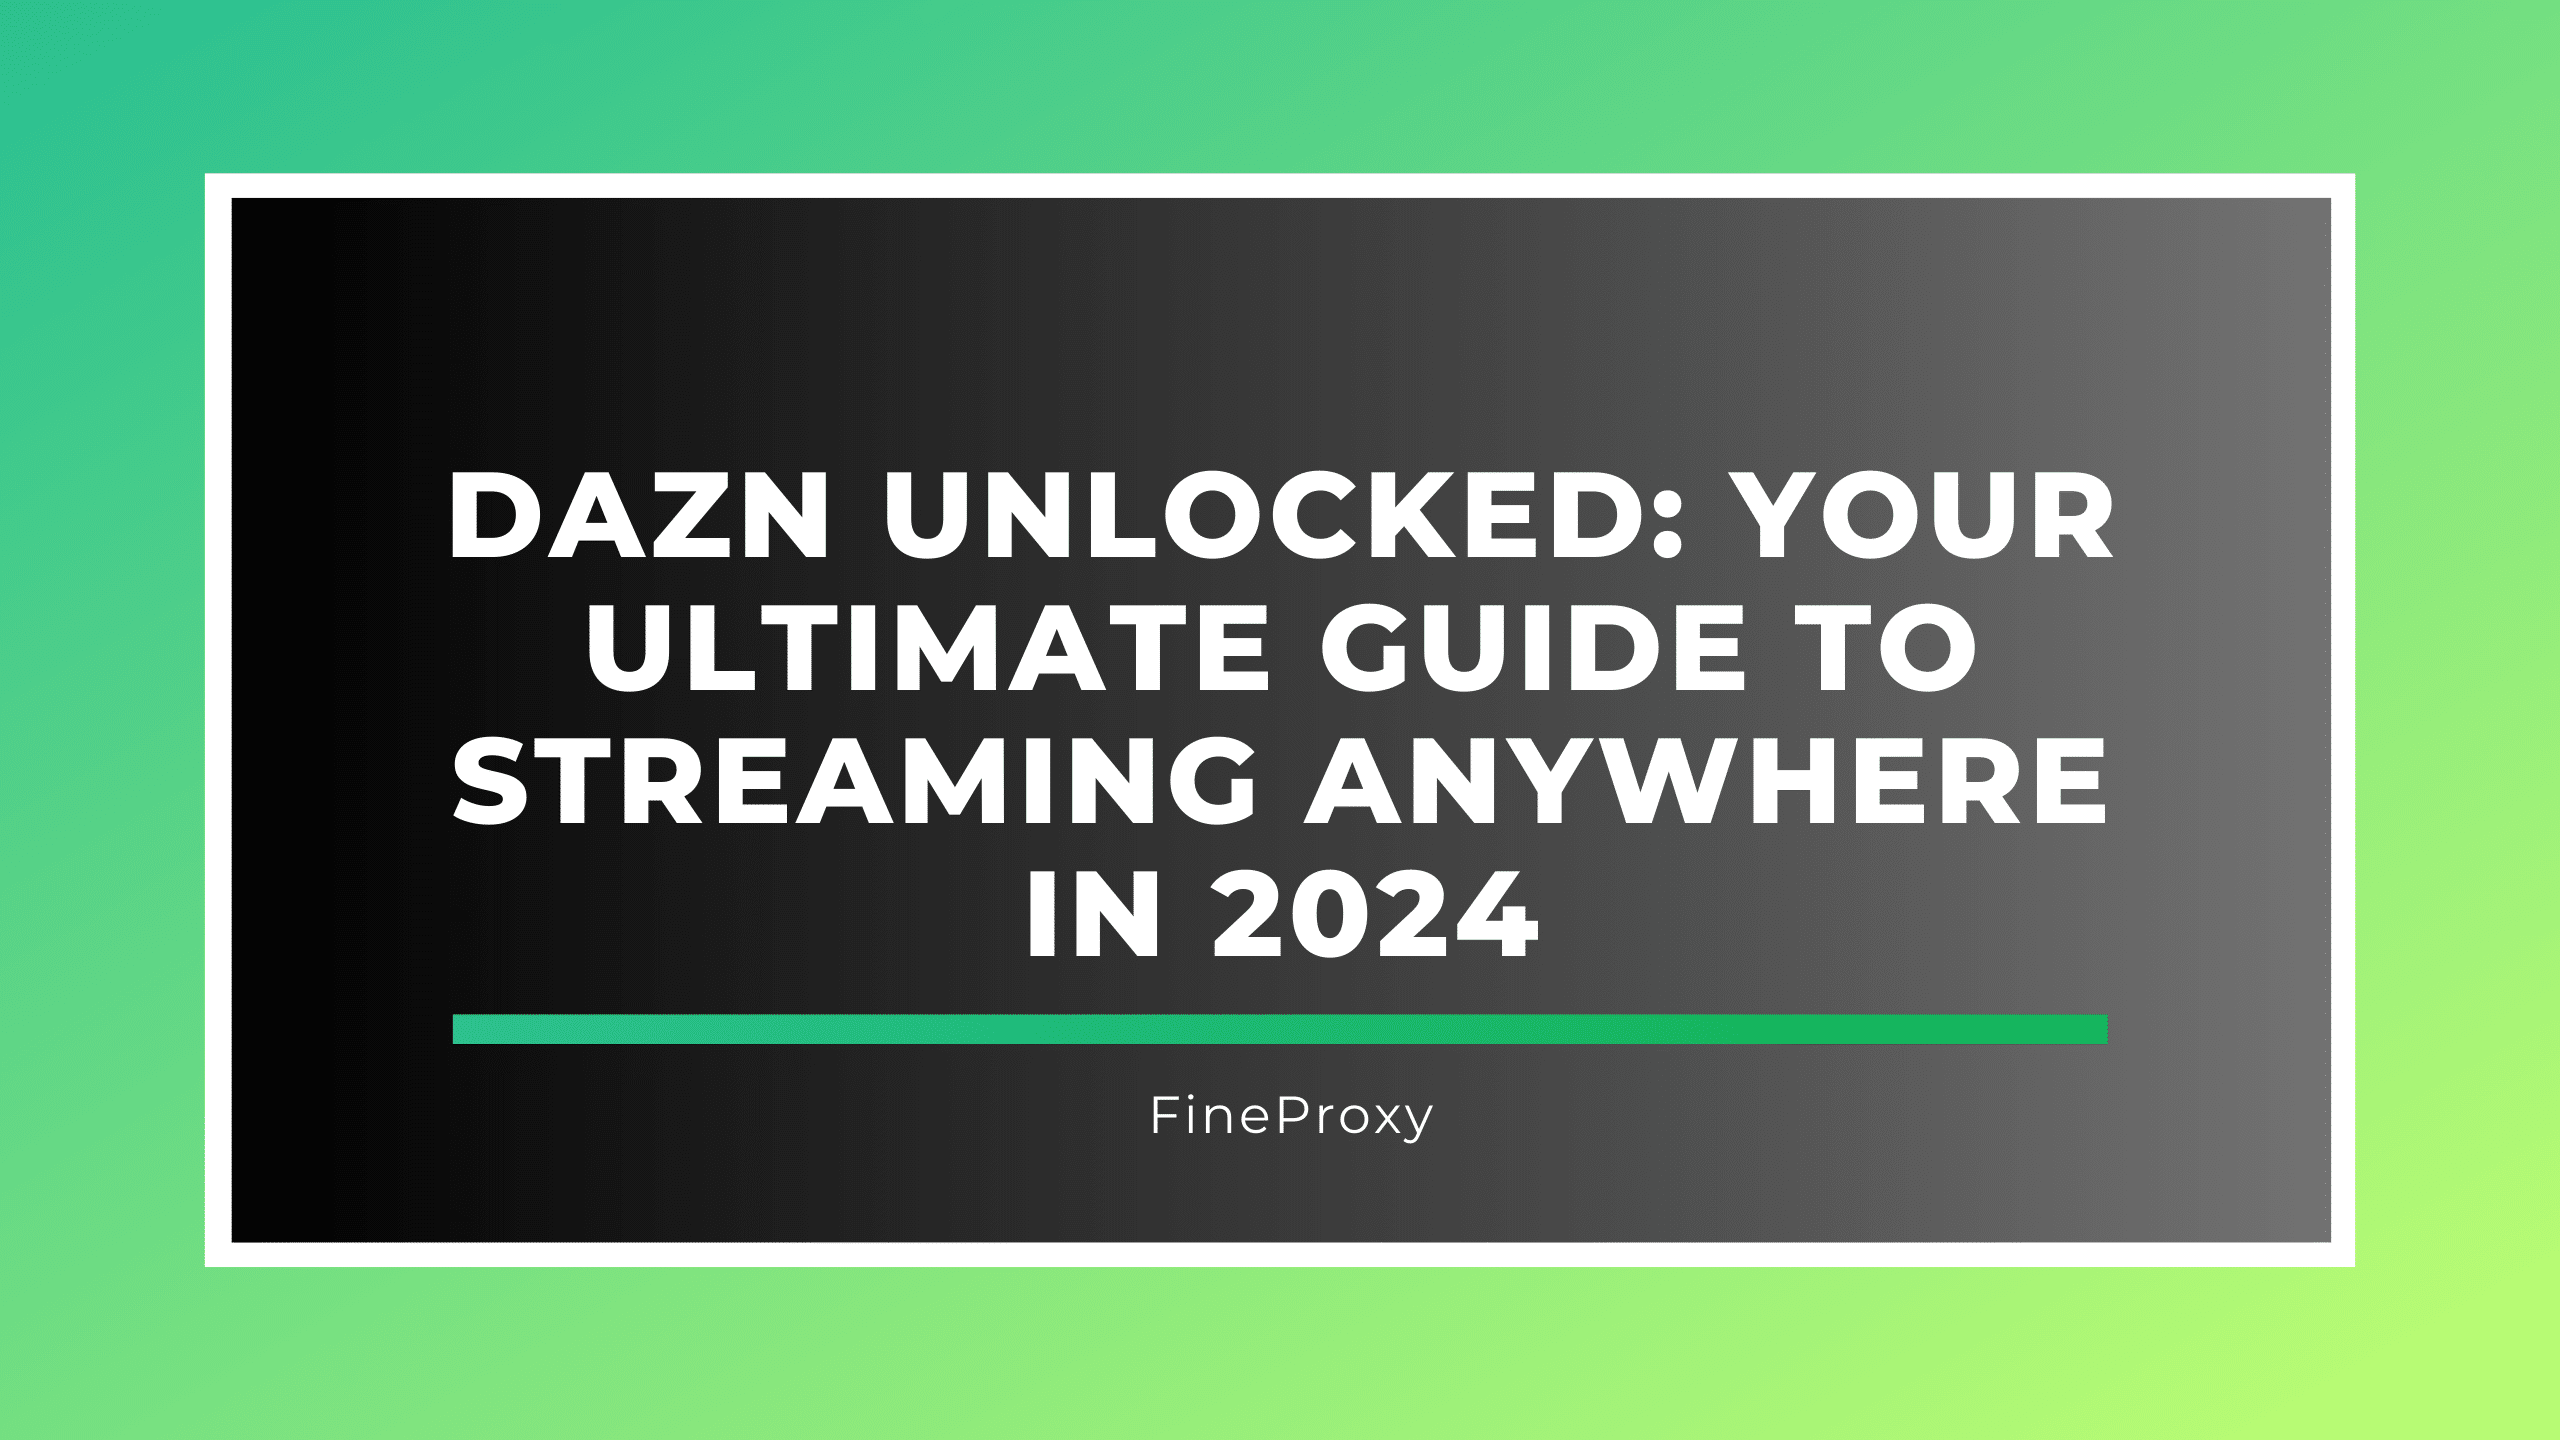 DAZN Unlocked: Your Ultimate Guide to Streaming Anywhere in 2024